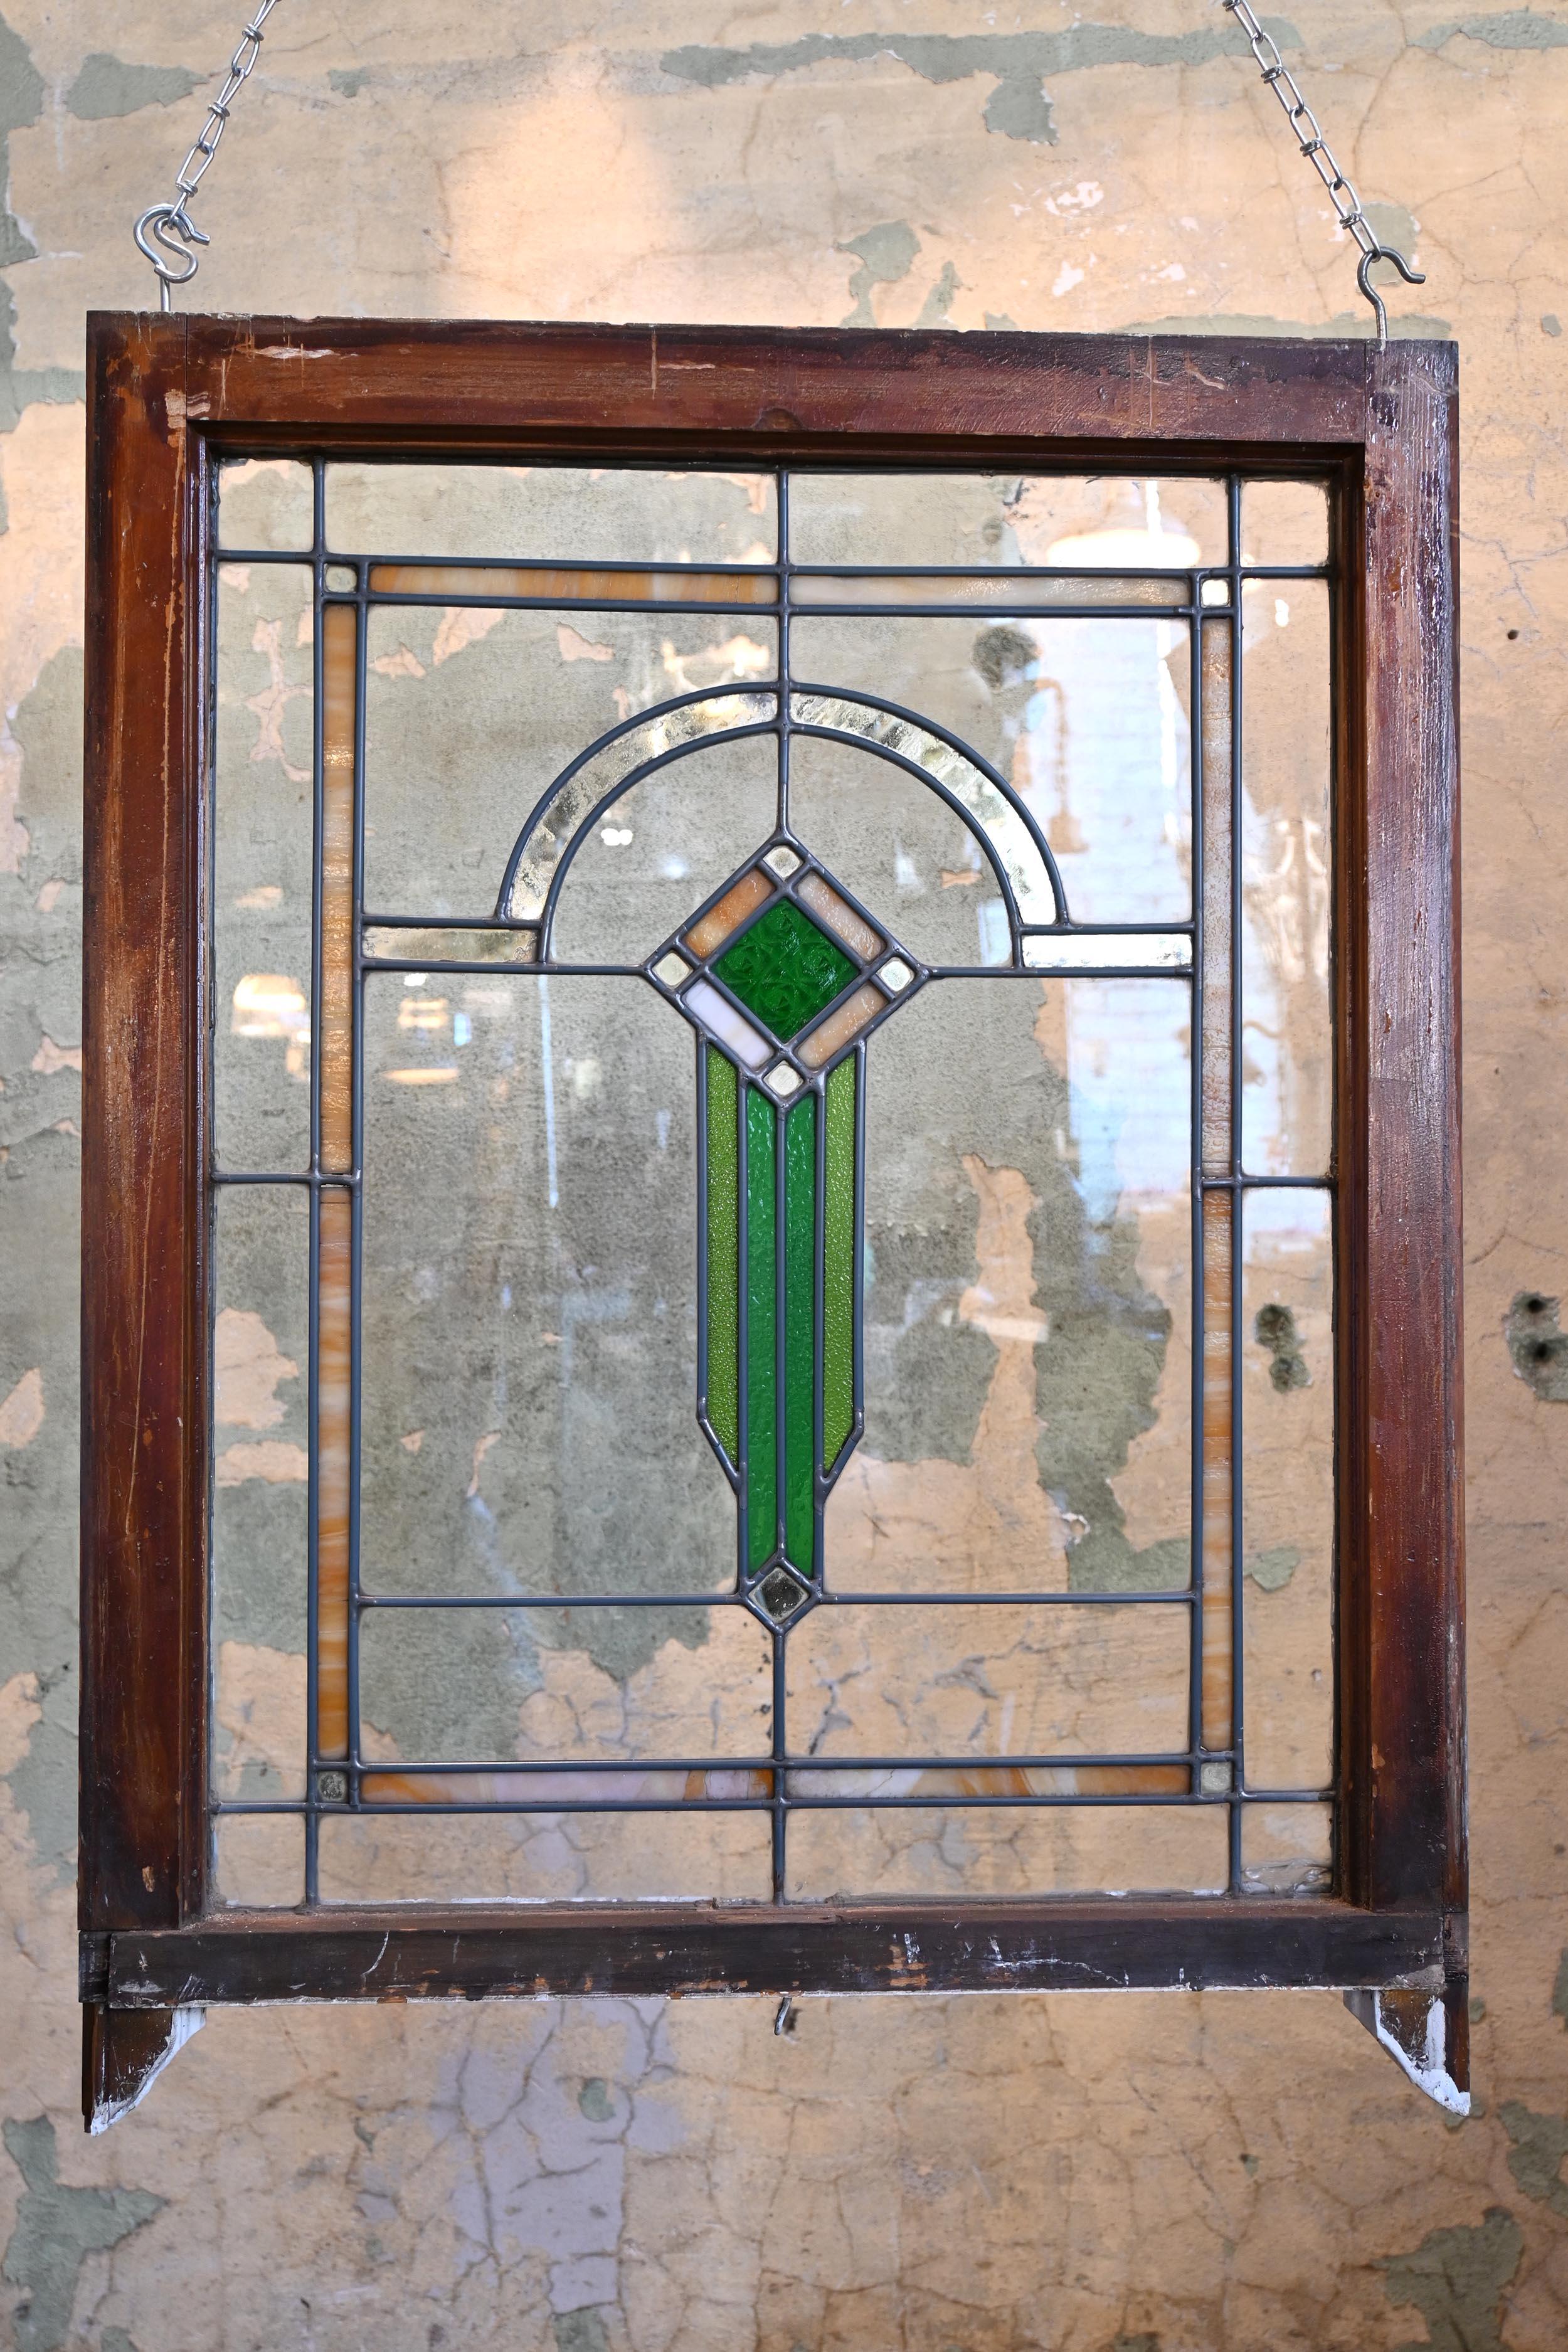 AA# 61035
13 of this size available
Stylized leaded glass called Bungalow or Prairie Glass windows brought their unique design of the geometric shapes, arches & flowers, with typical touch of color amidst clear glass they brought beauty in